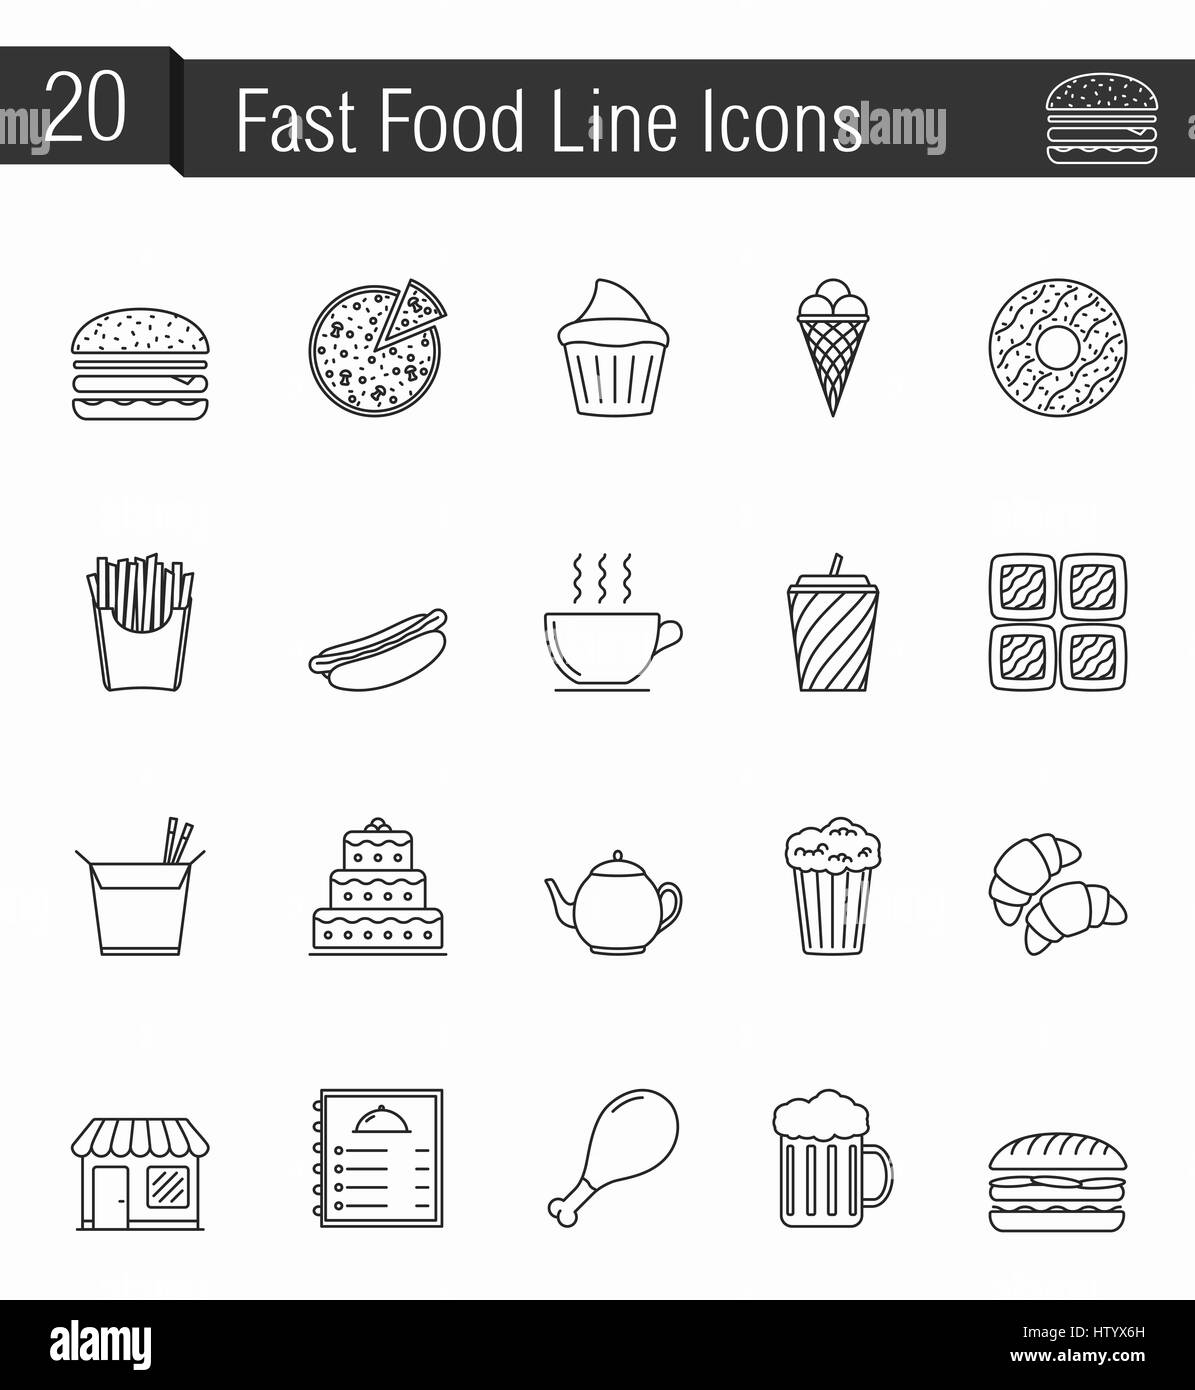 20 fast food line icons Stock Photo